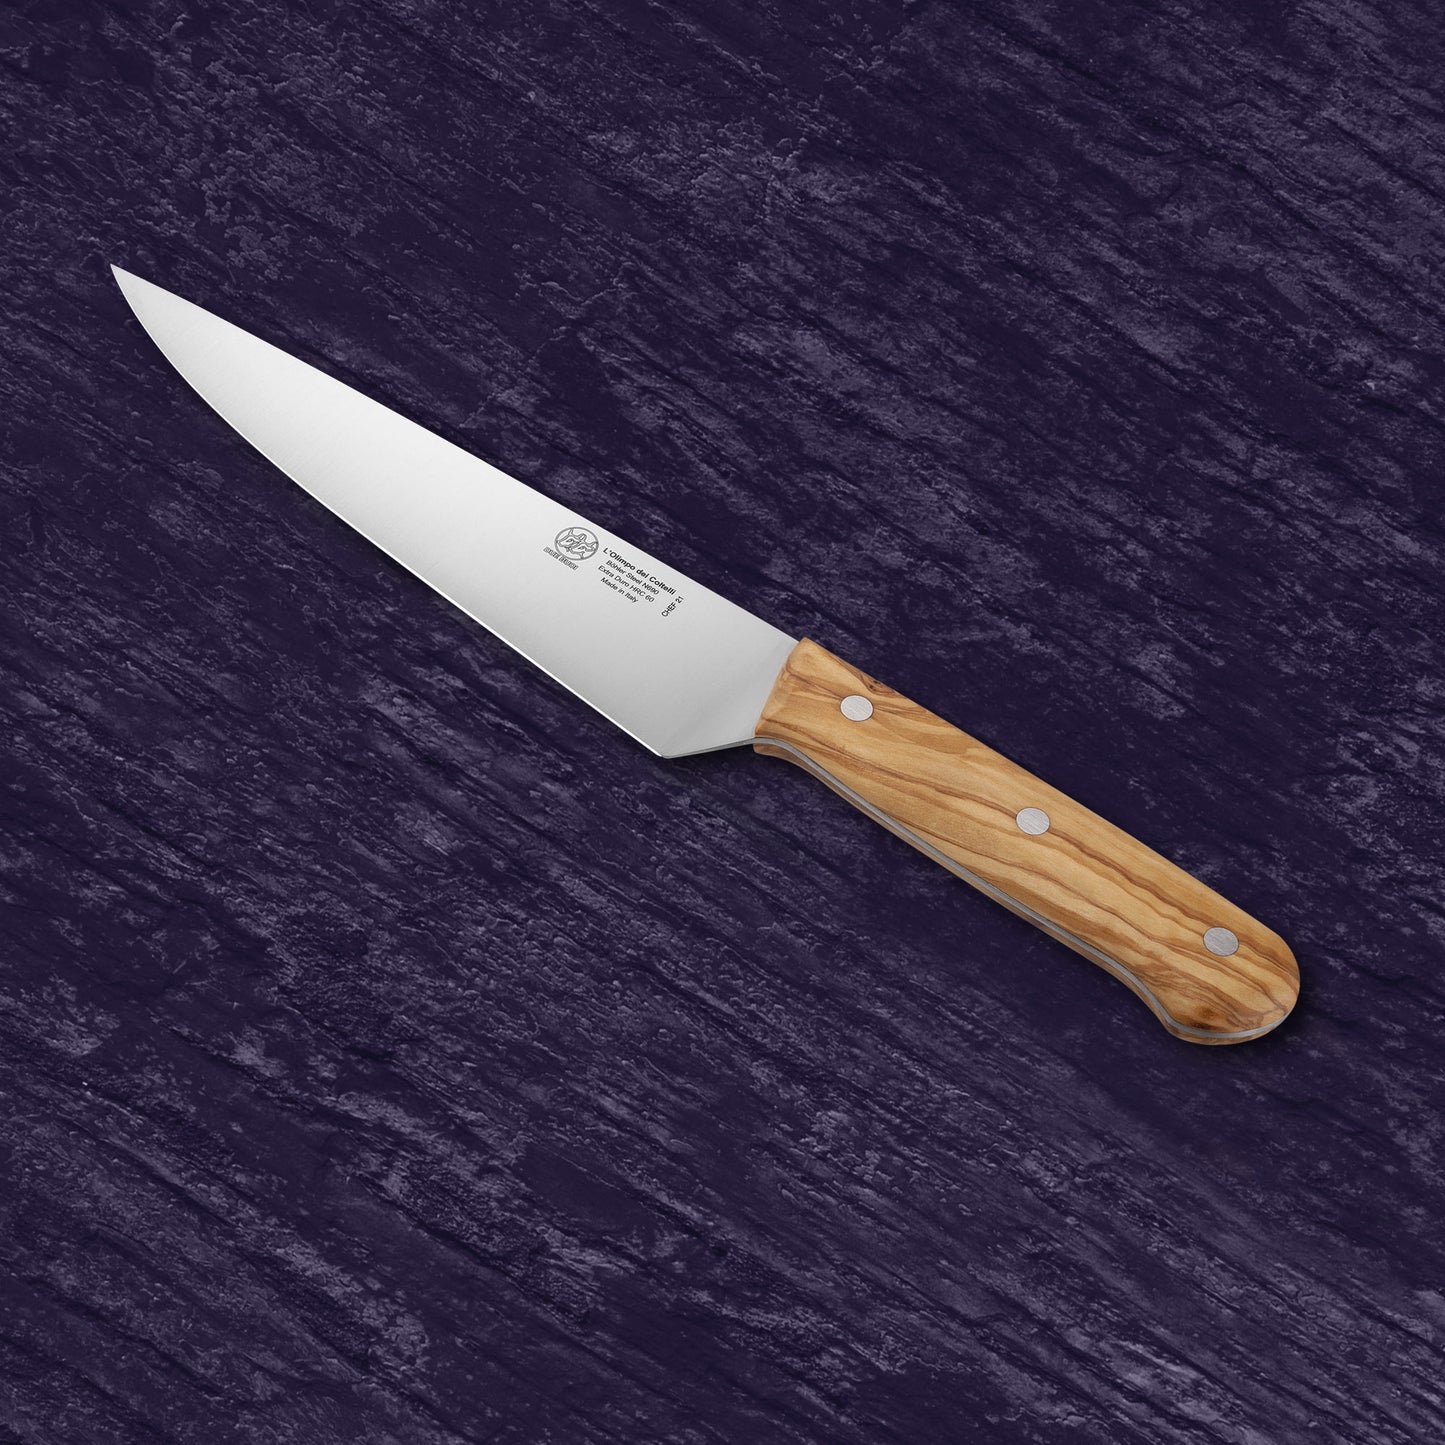 
                  
                    Chef Knife - Blade 8.26” - N690 Stainless Steel - Hrc 60 - Olive Wood Handle
                  
                